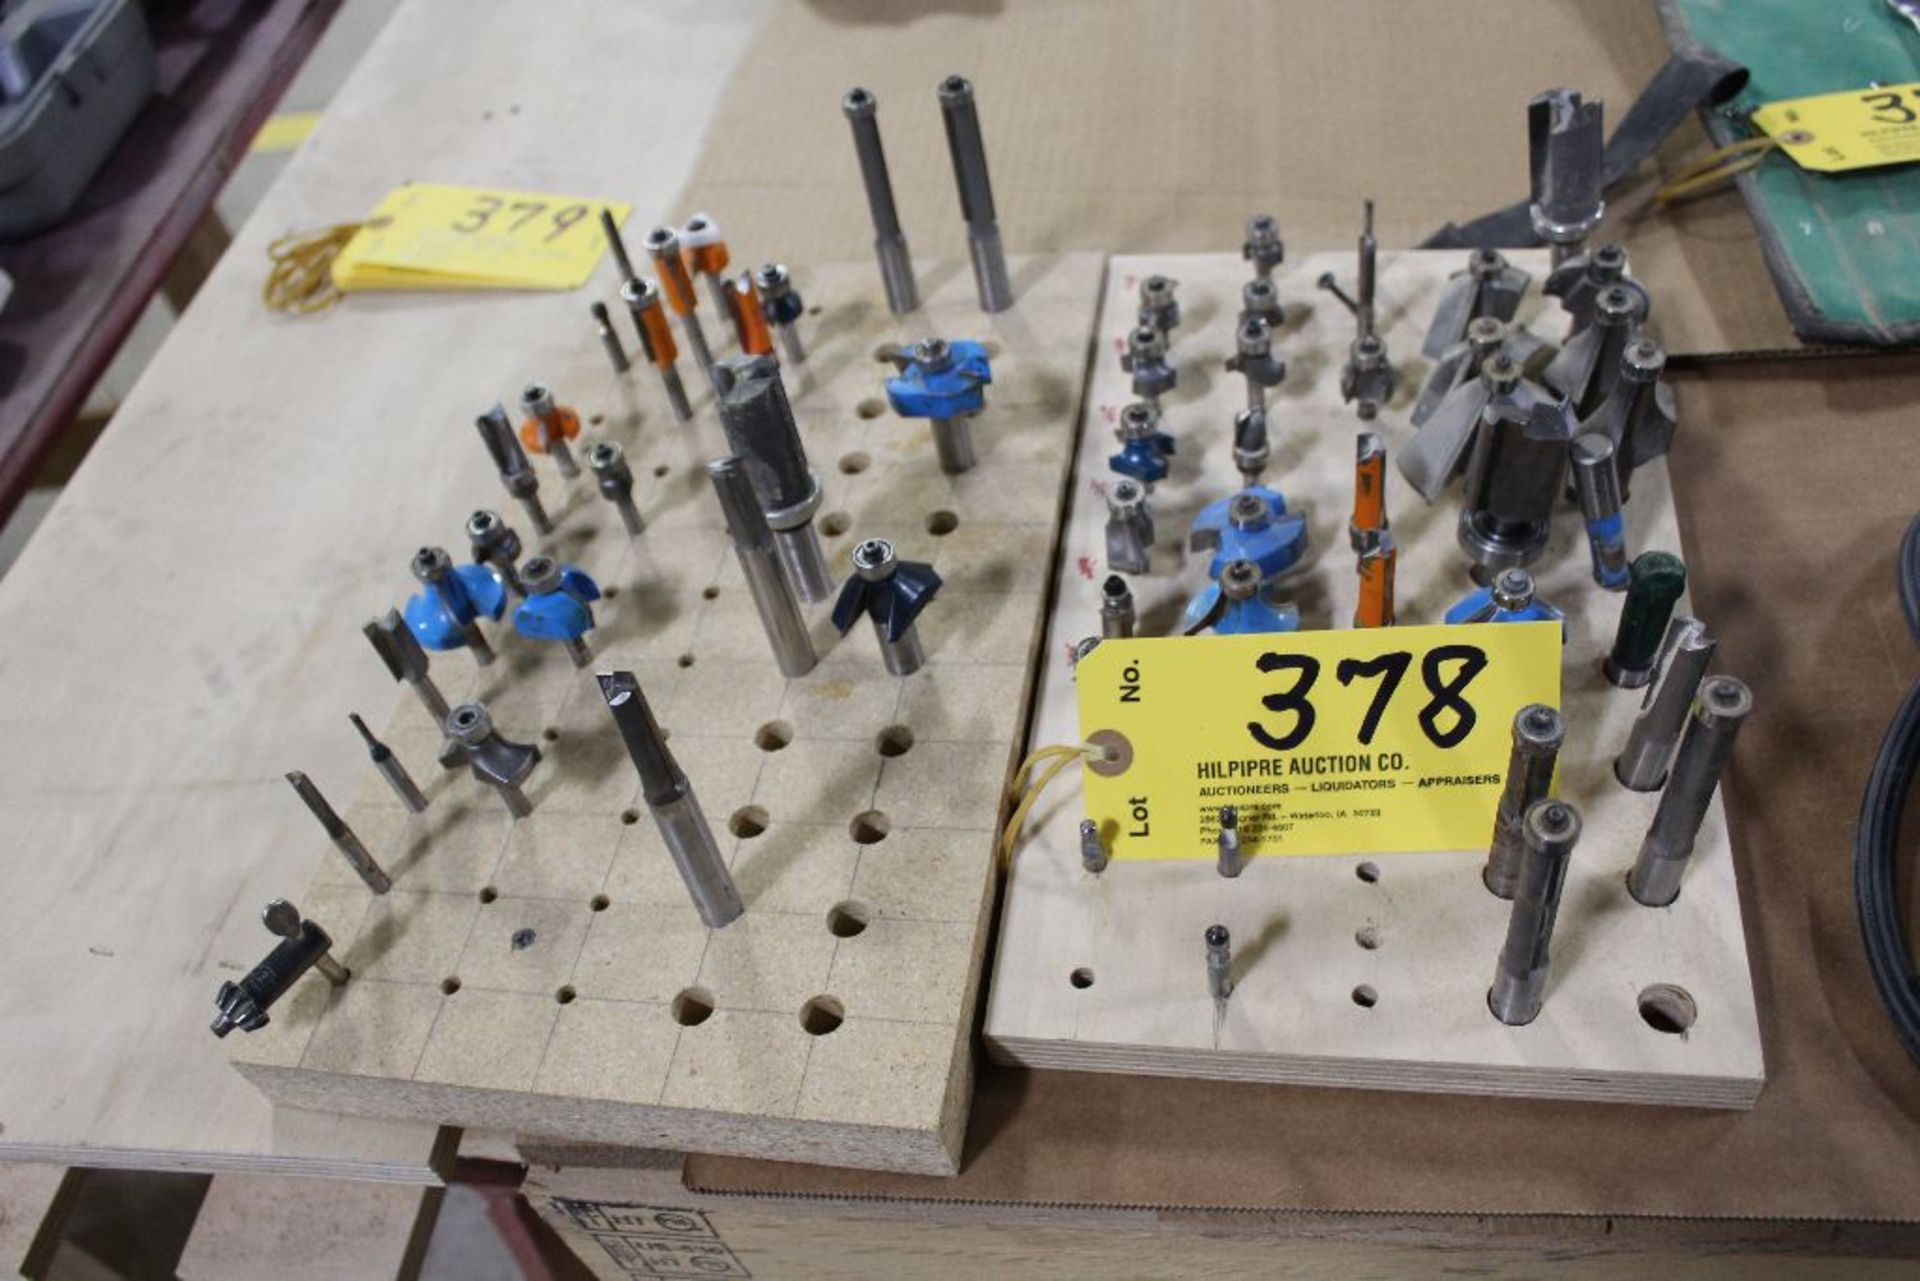 Router bits.